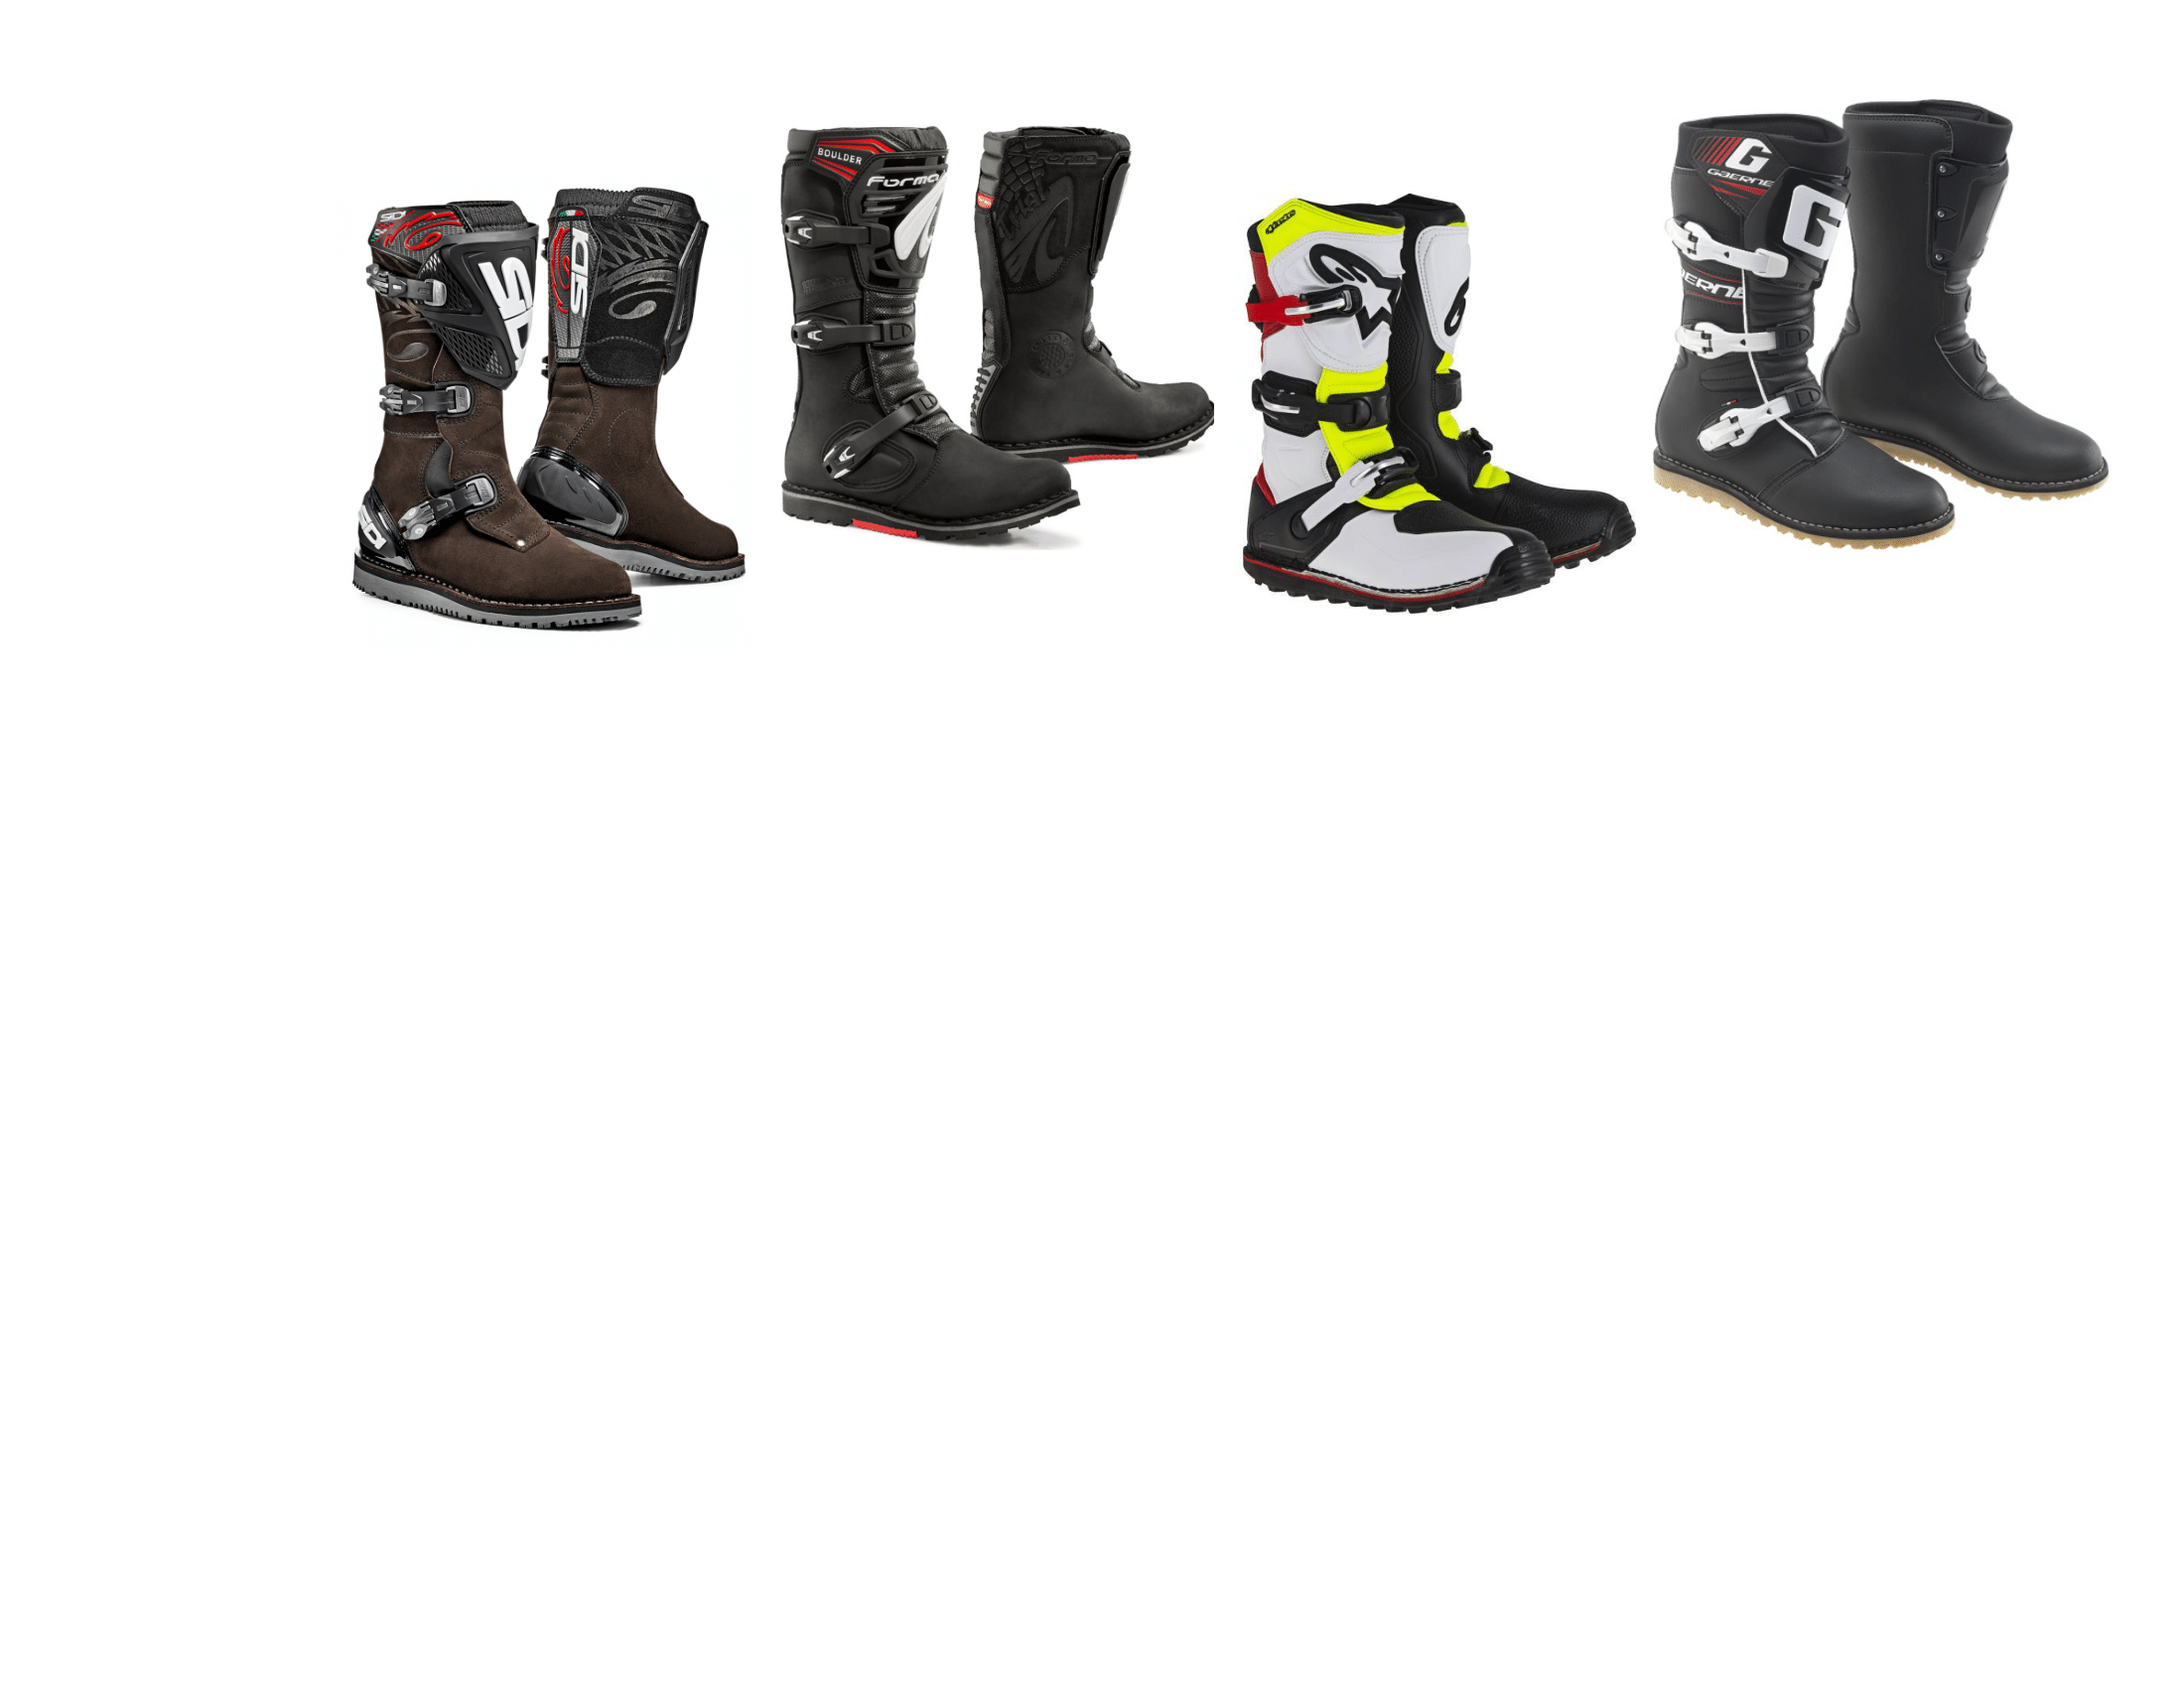 trials bike boots for sale